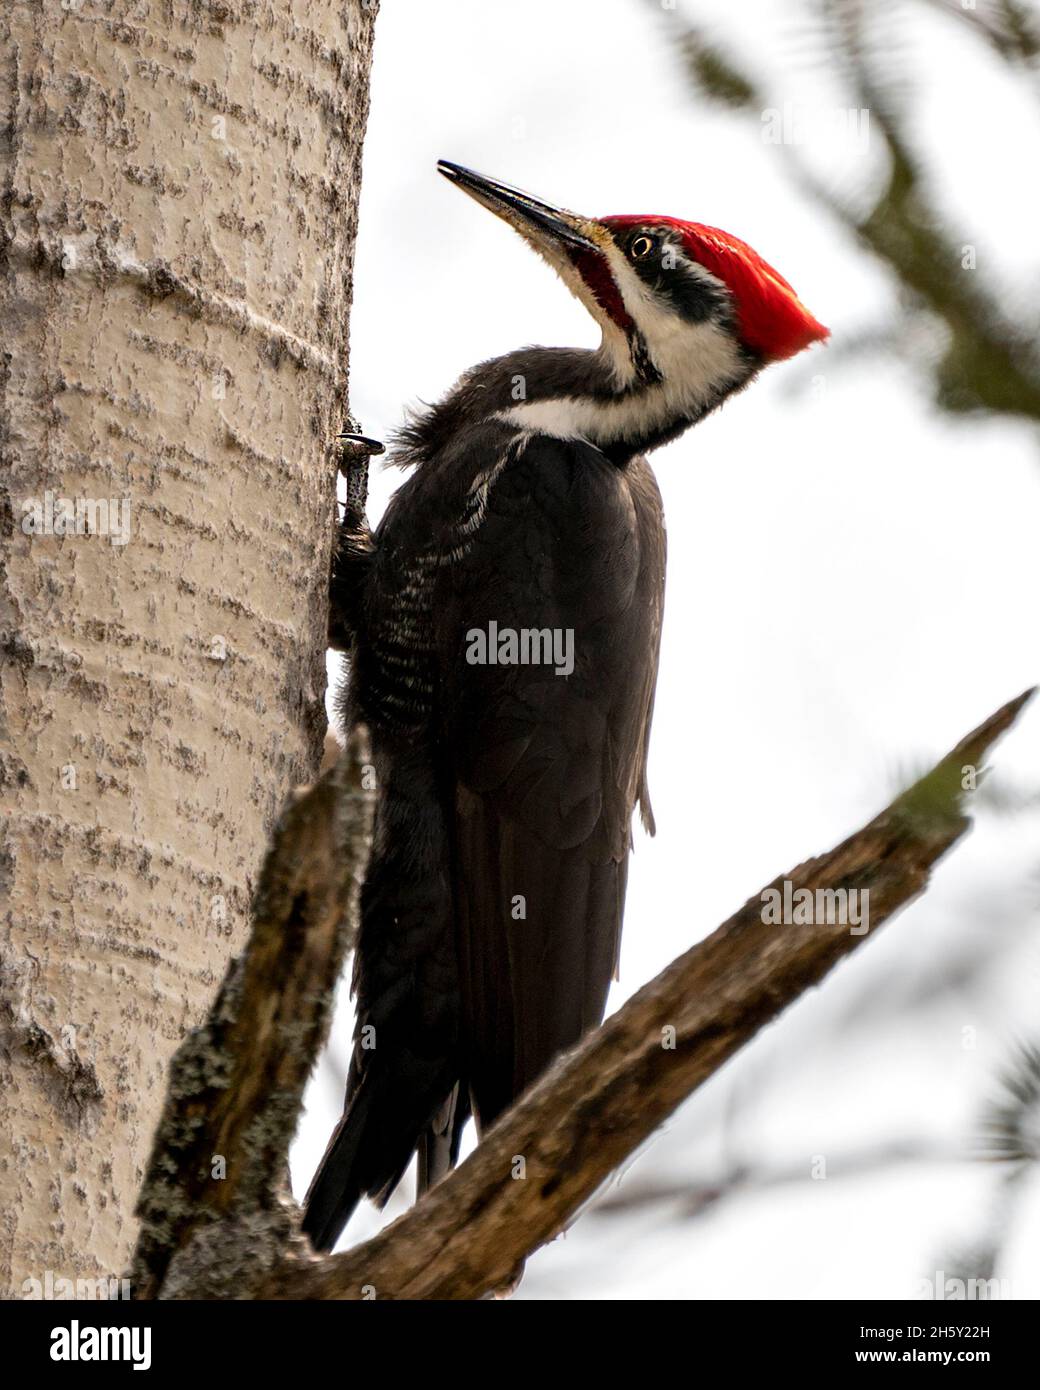 Woodpecker close-up profile view perched on a tree trunk with blur background in its environment and habitat. Pileated Woodpecker Image. Picture. Stock Photo